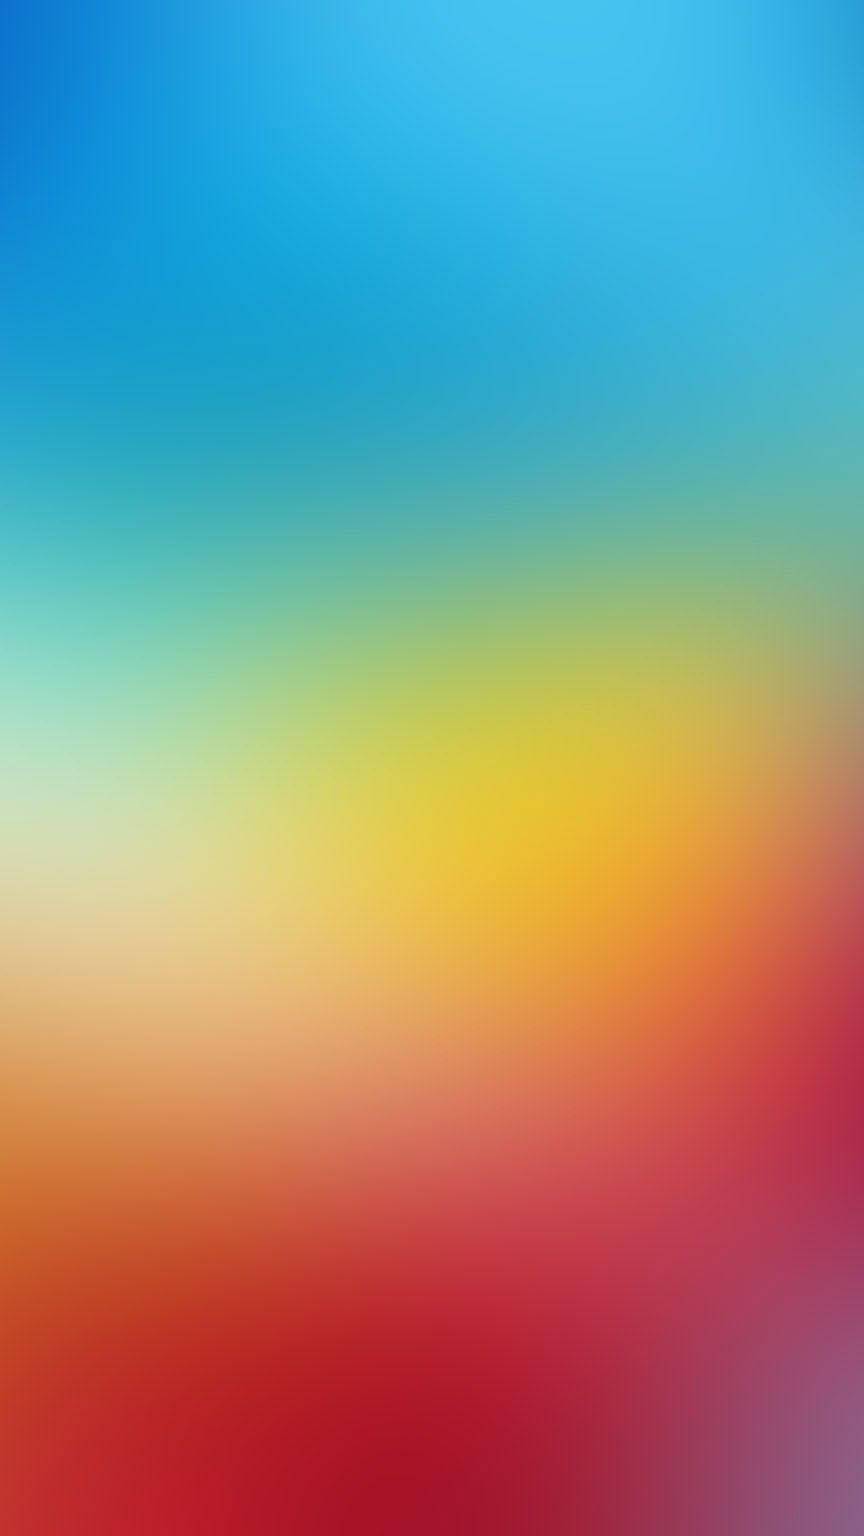 Blur iPhone Wallpapers